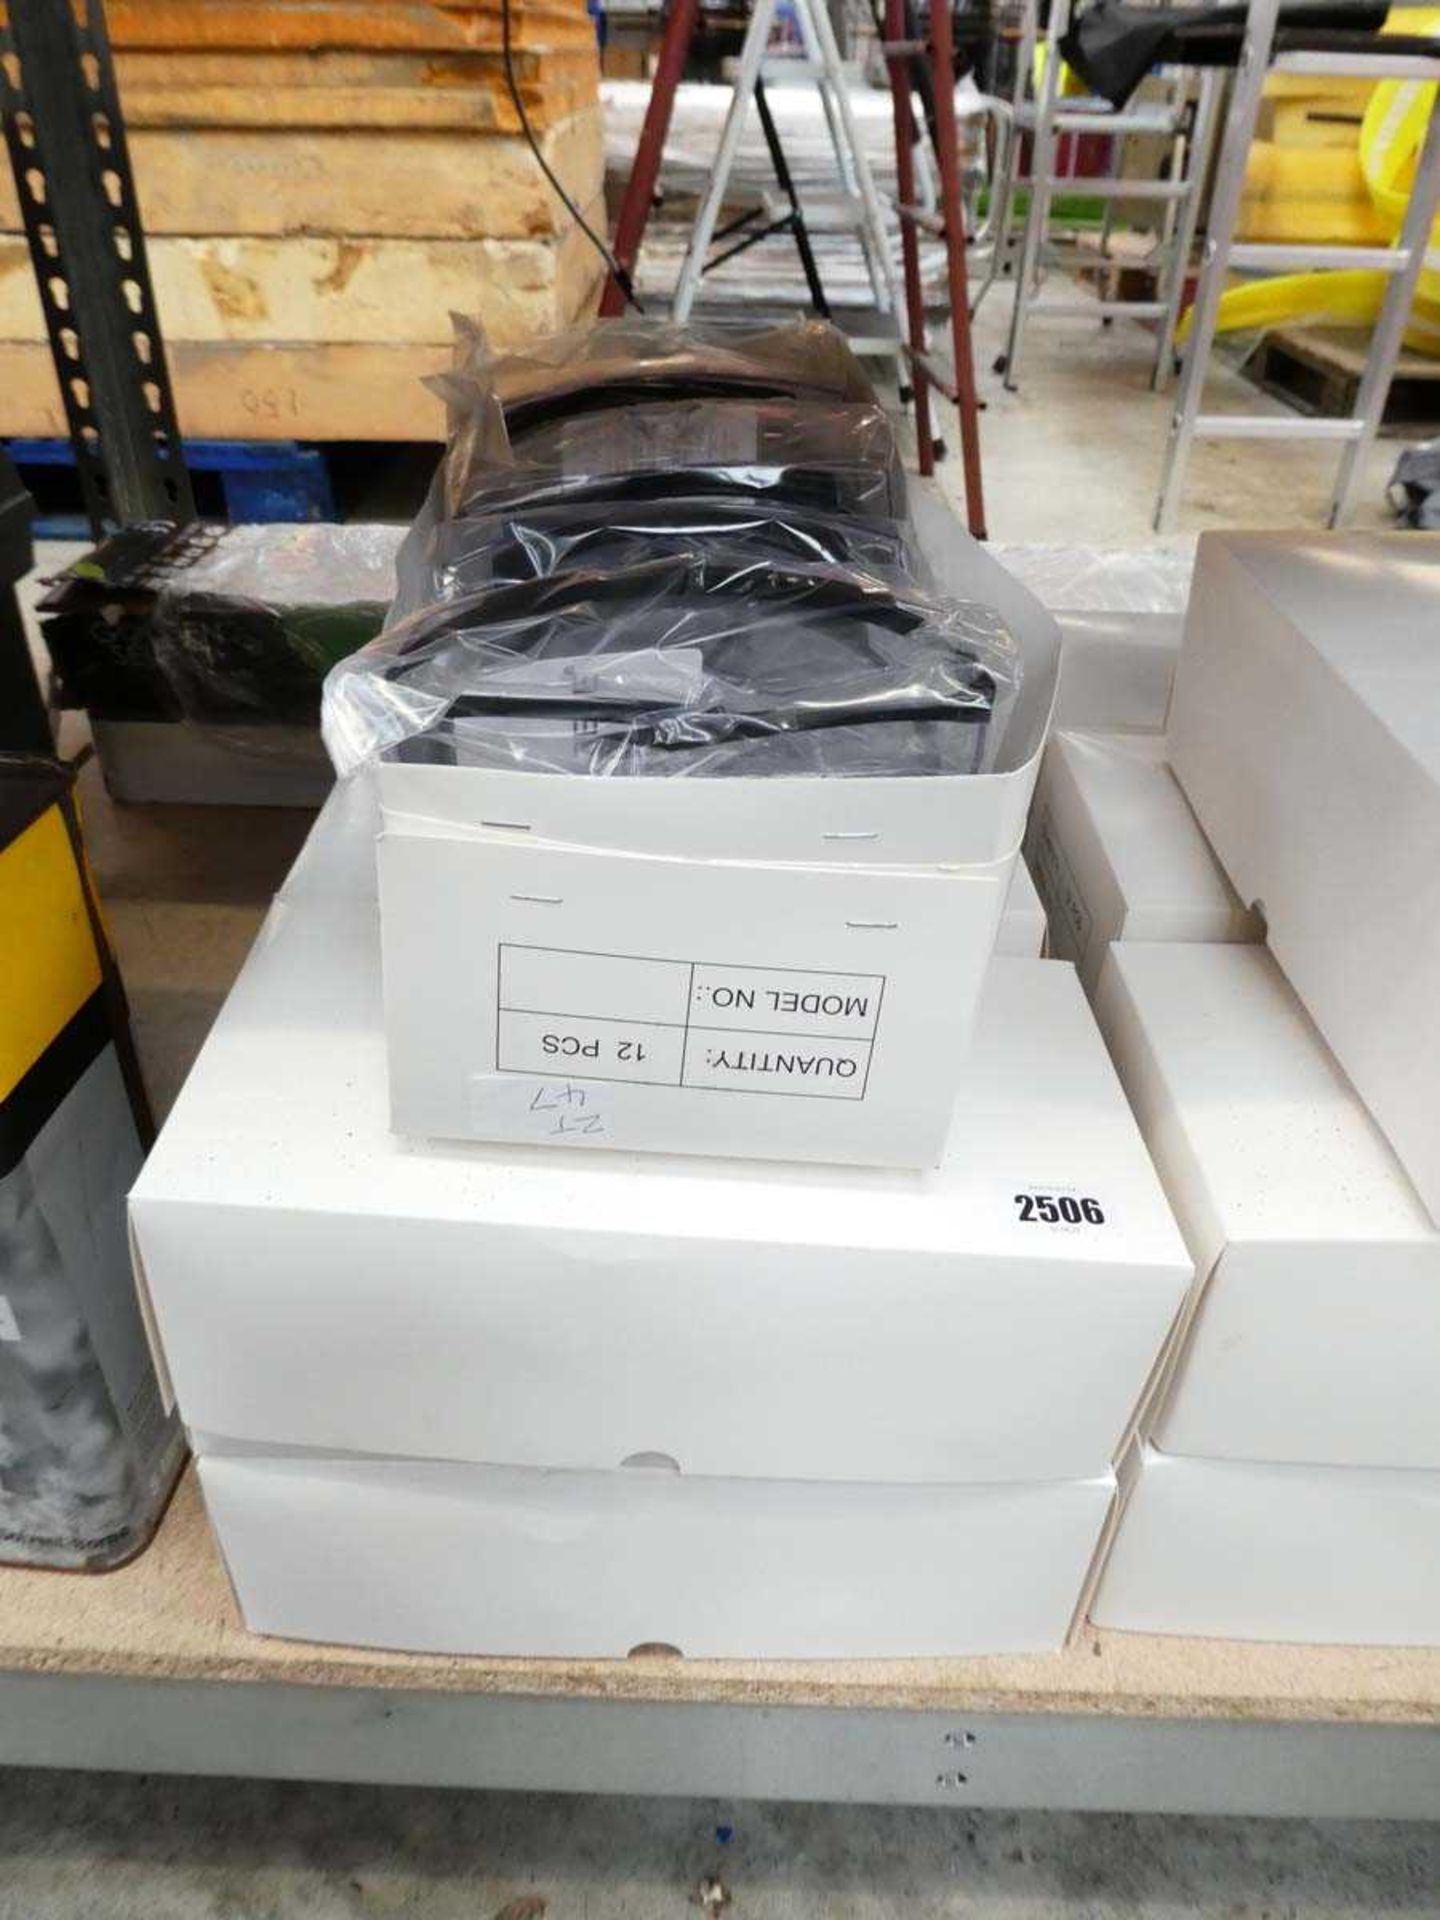 7 boxes containing safety goggles